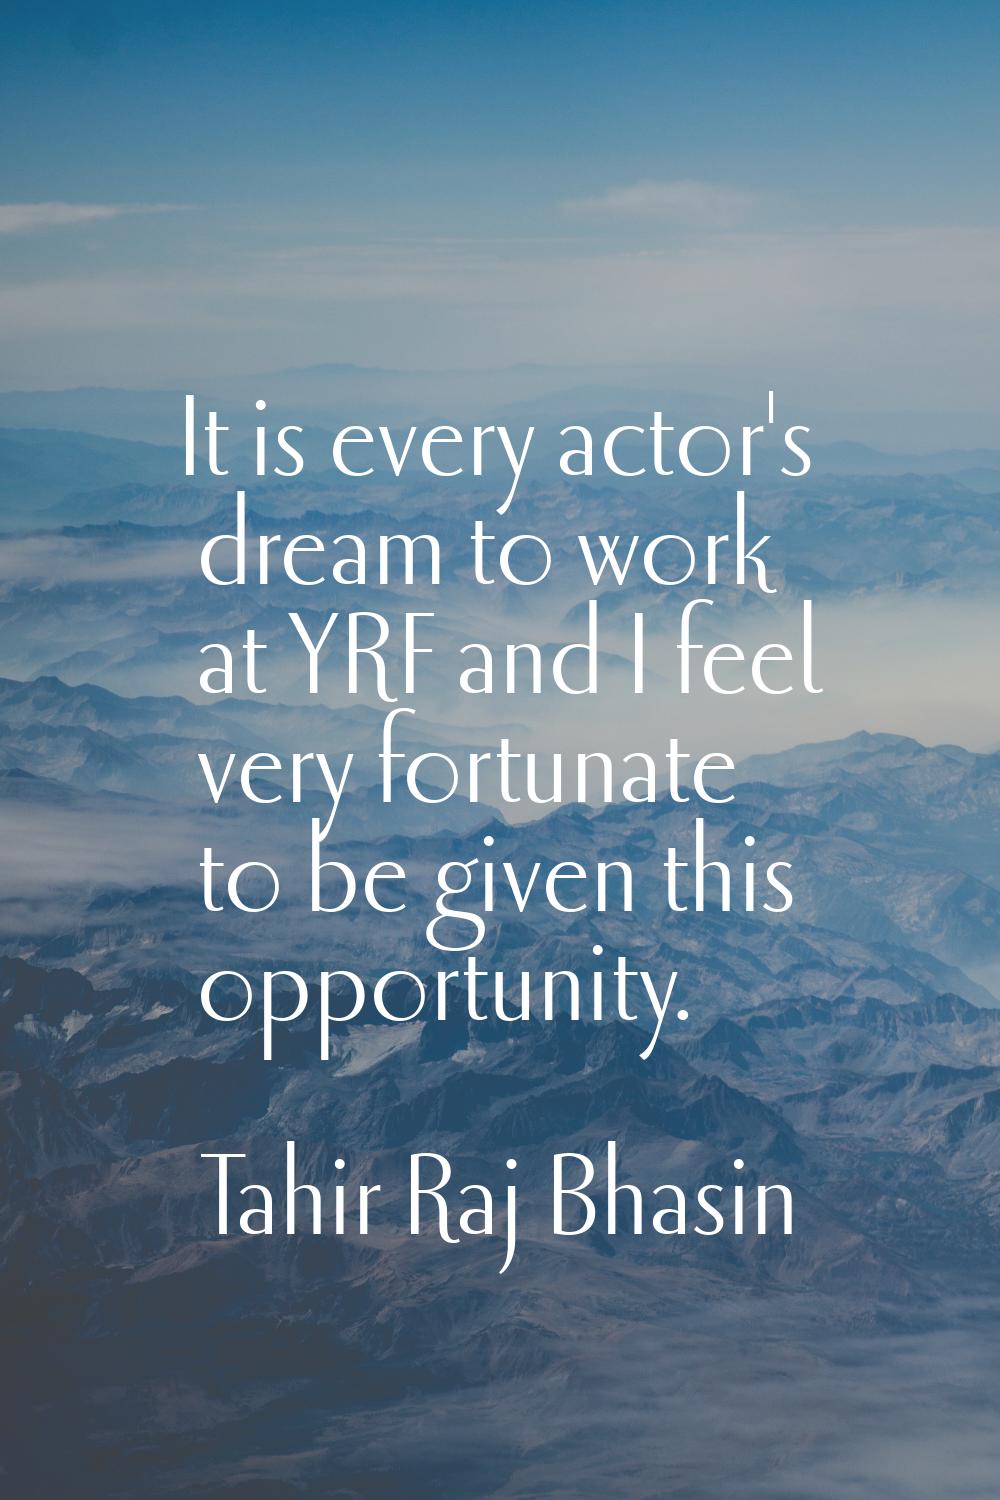 It is every actor's dream to work at YRF and I feel very fortunate to be given this opportunity.